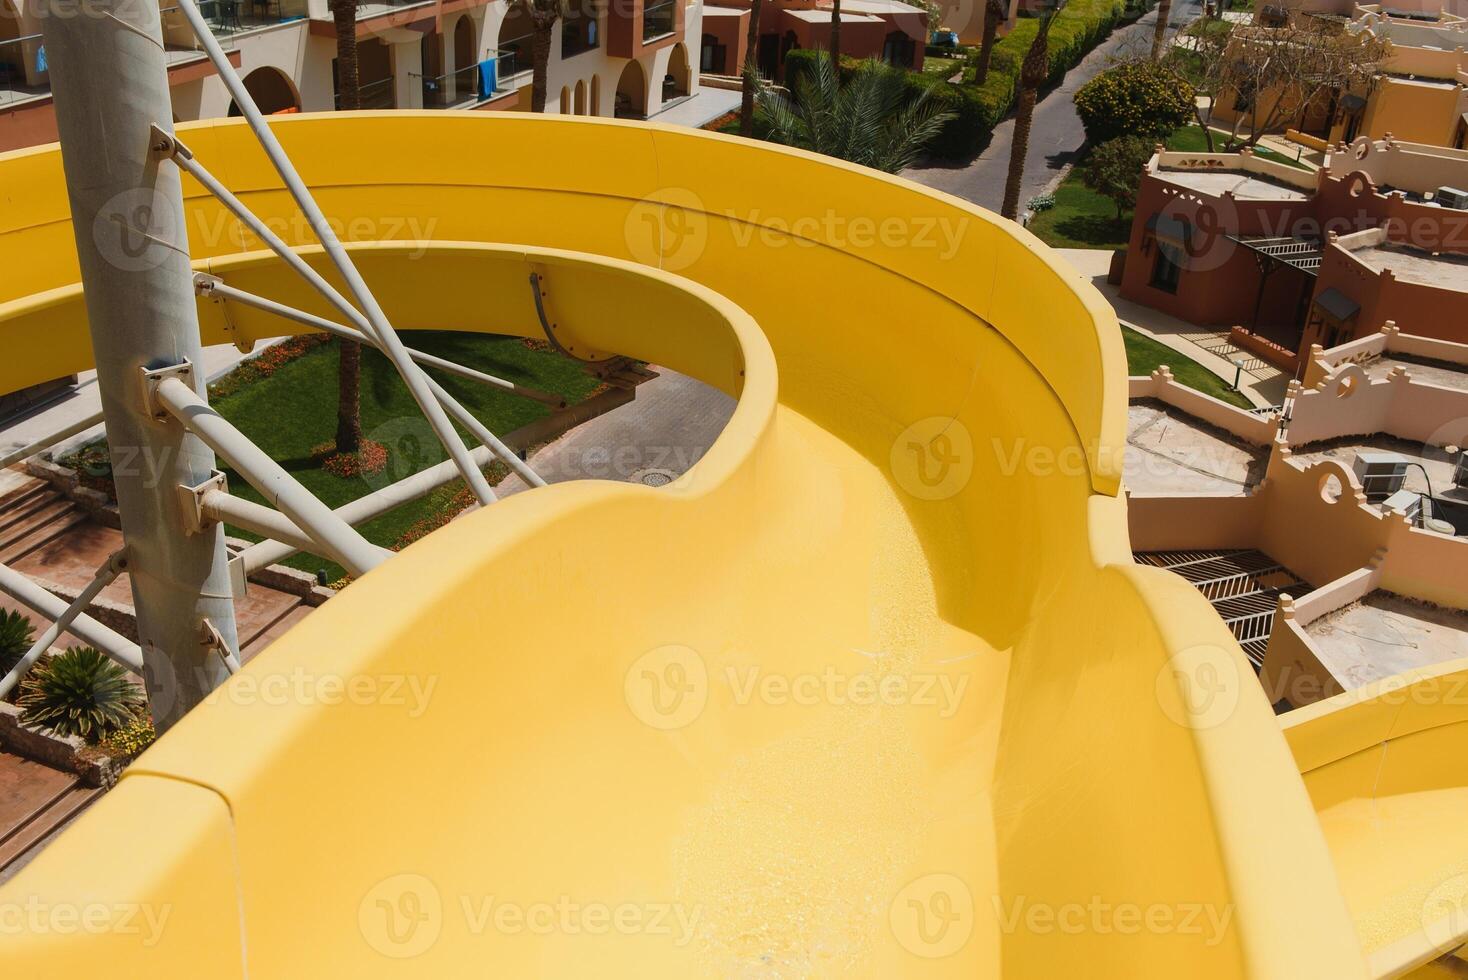 water slides at the water park photo